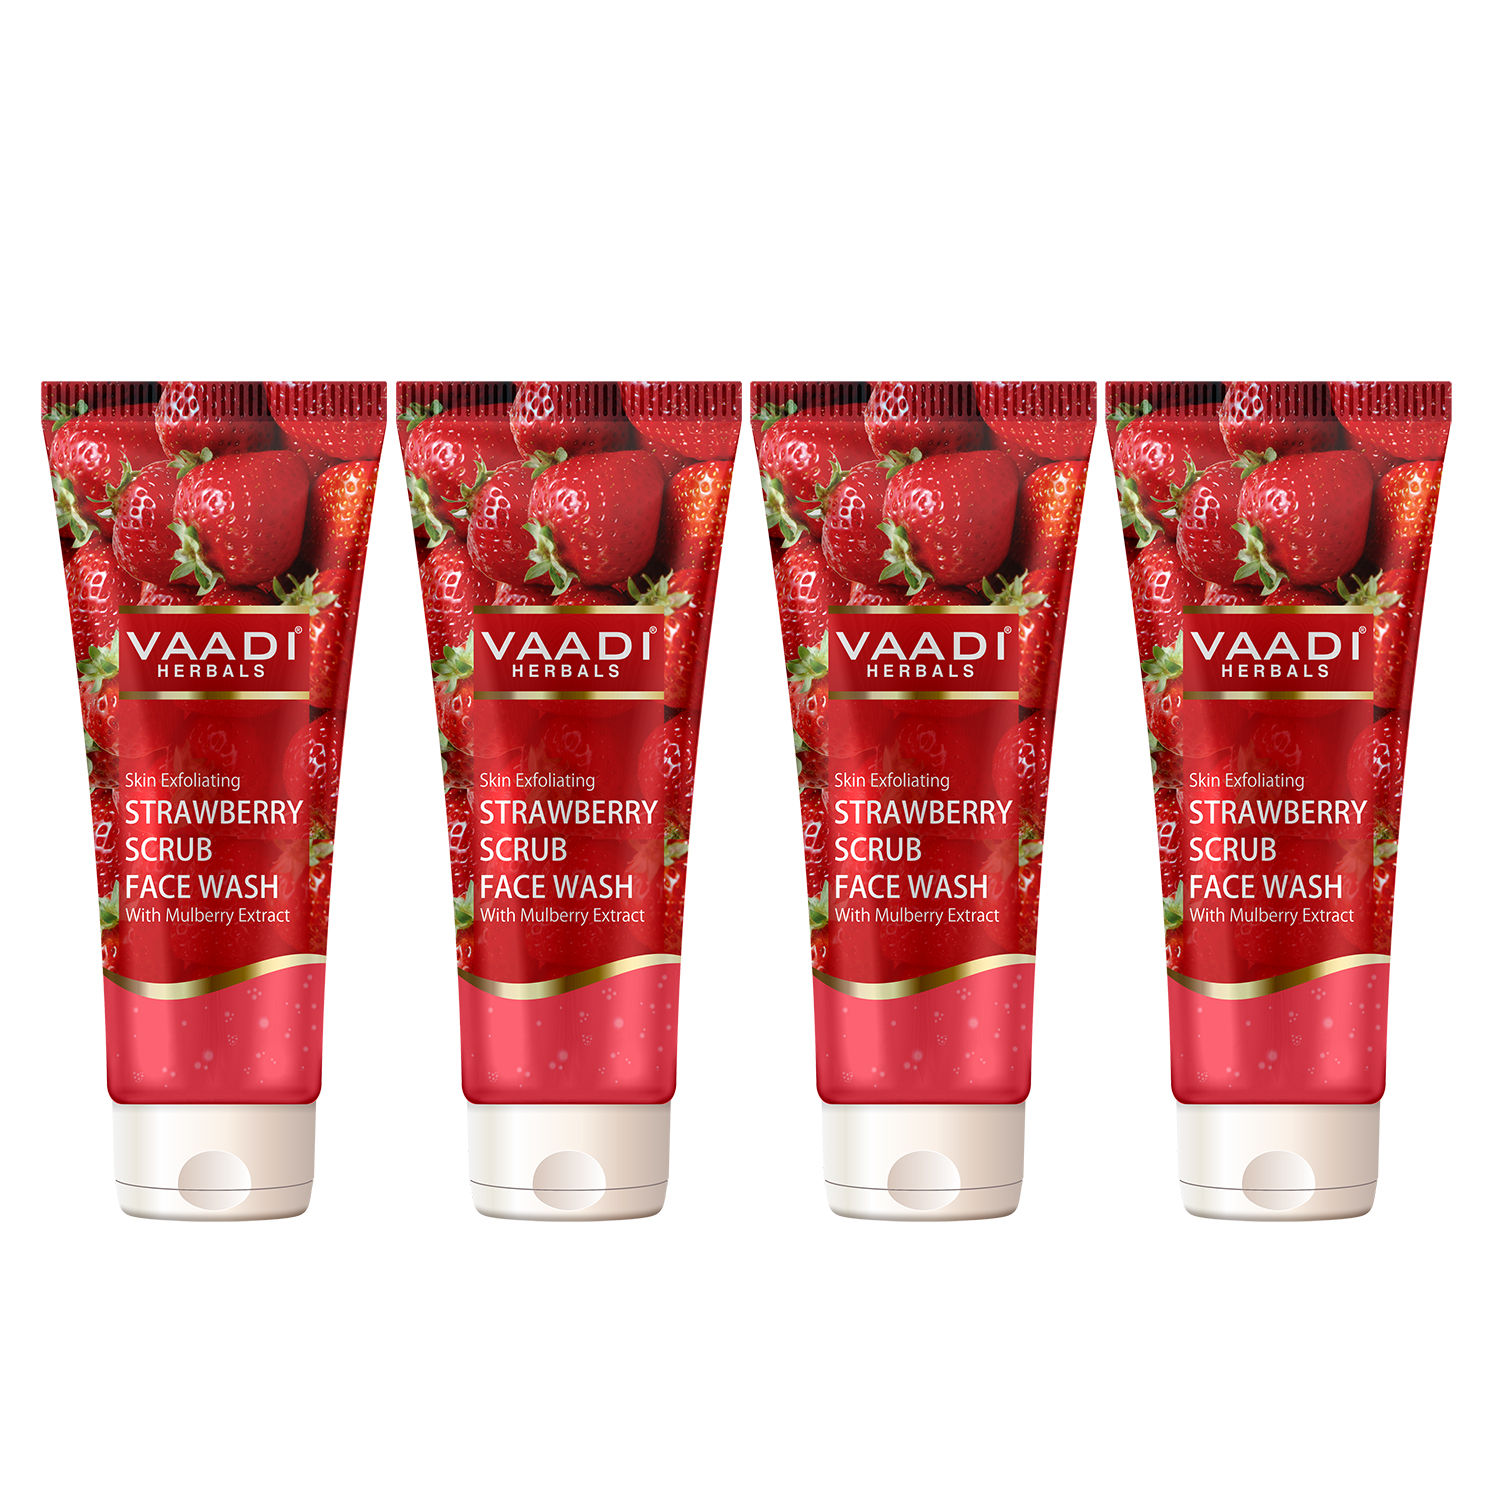 Buy Vaadi Herbals Value Pack Of Strawberry Scrub Face Wash With Mulberry Extract (60 mlx4) - Purplle